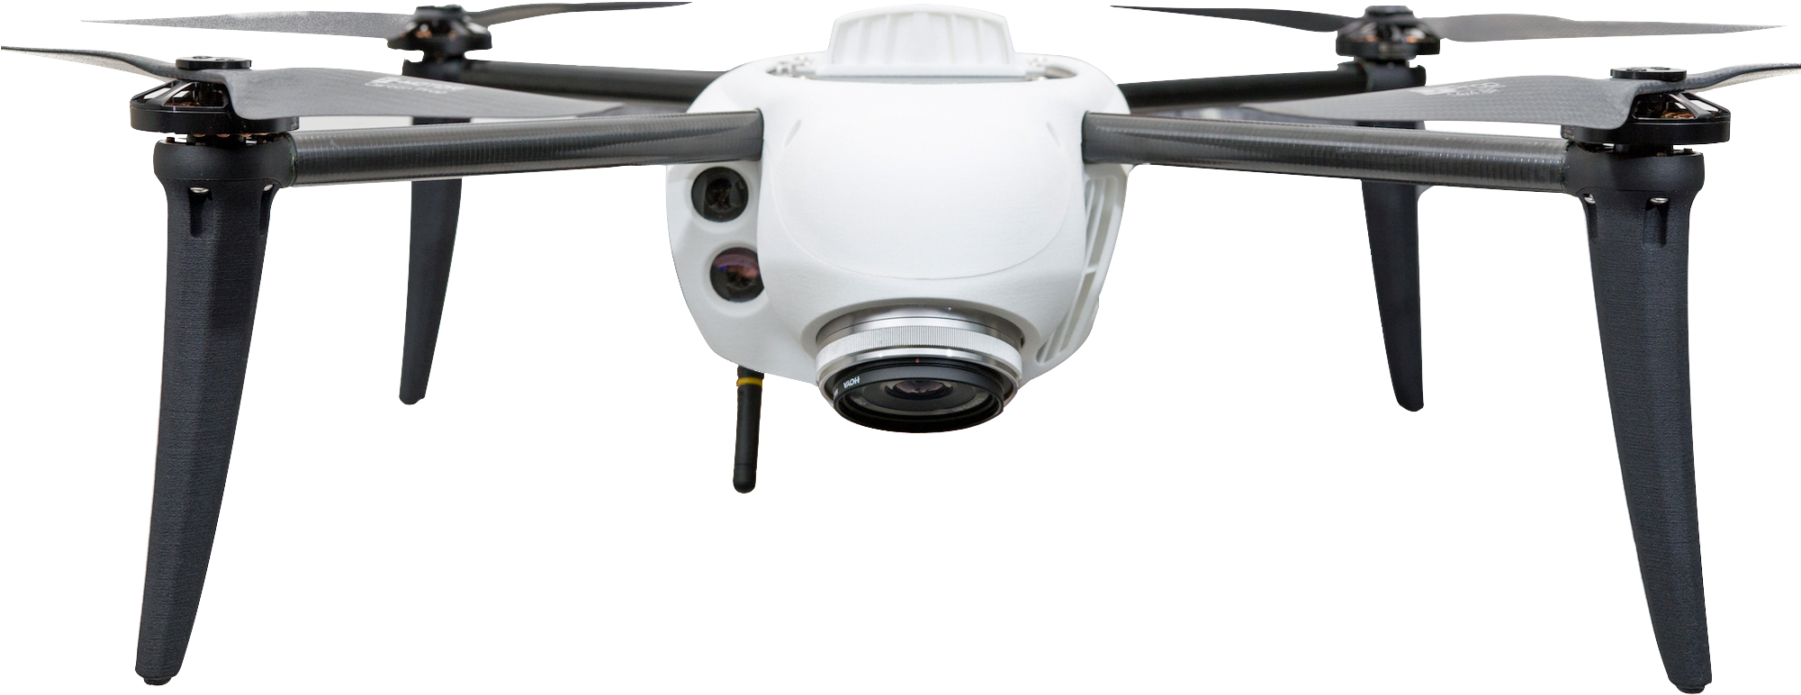 Quadcopter Dronewith Camera PNG